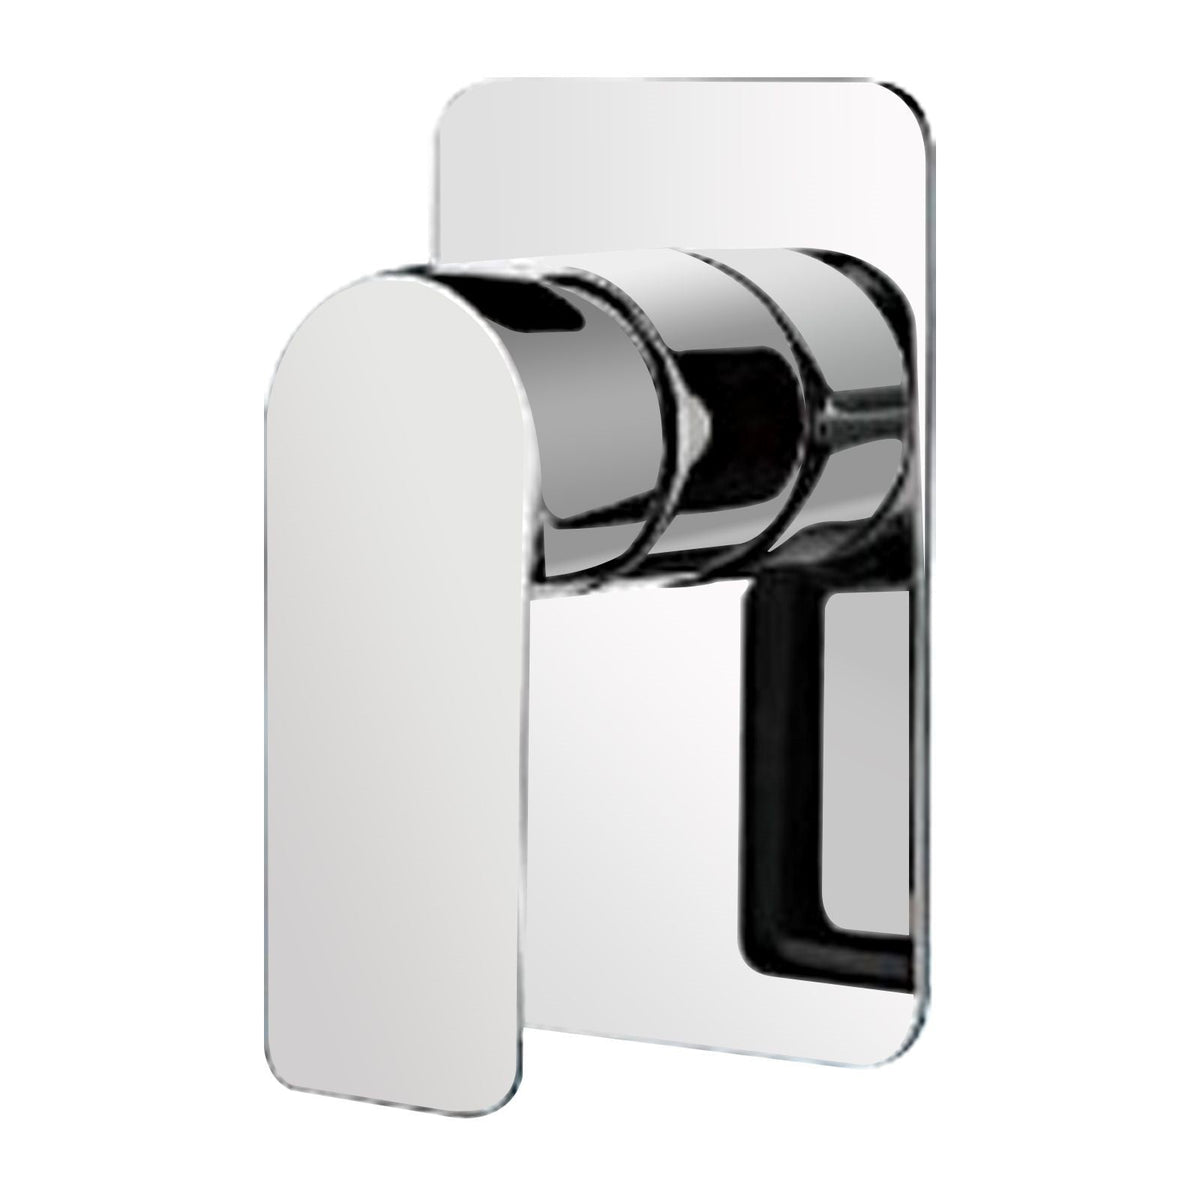 VOG Solid Brass Chrome Shower/Bath Wall Mixer(color up)